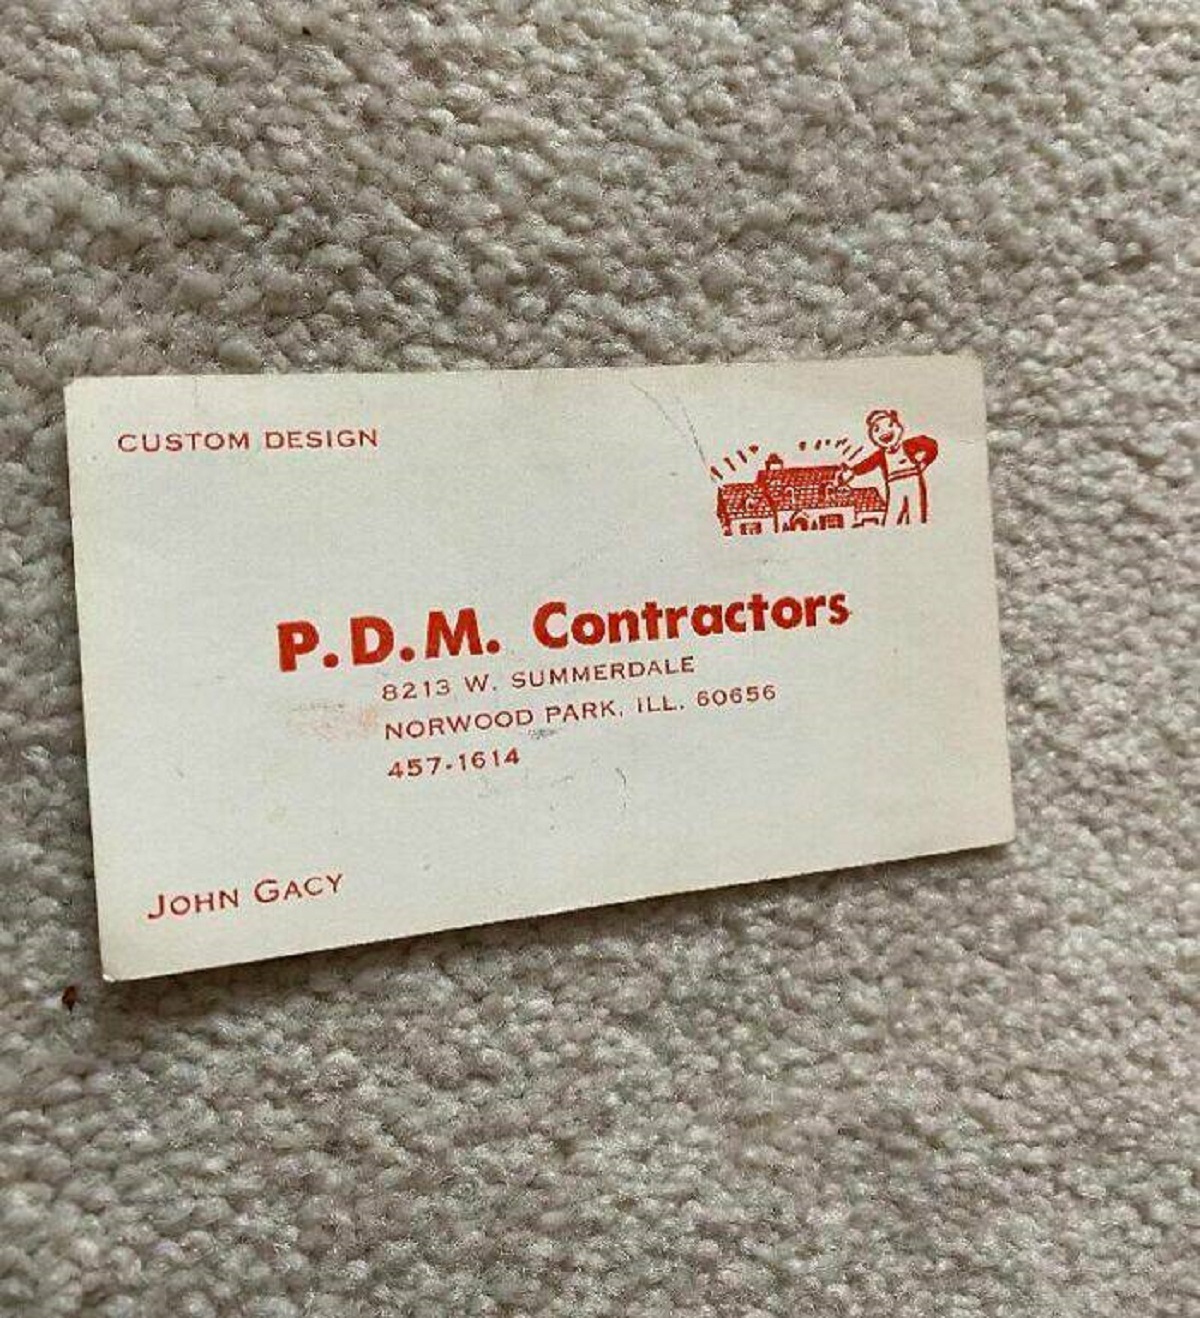 "John Wayne Gacy Did Construction For My Grandparents And We Found His Business Card While Going Through Some Stuff Today"